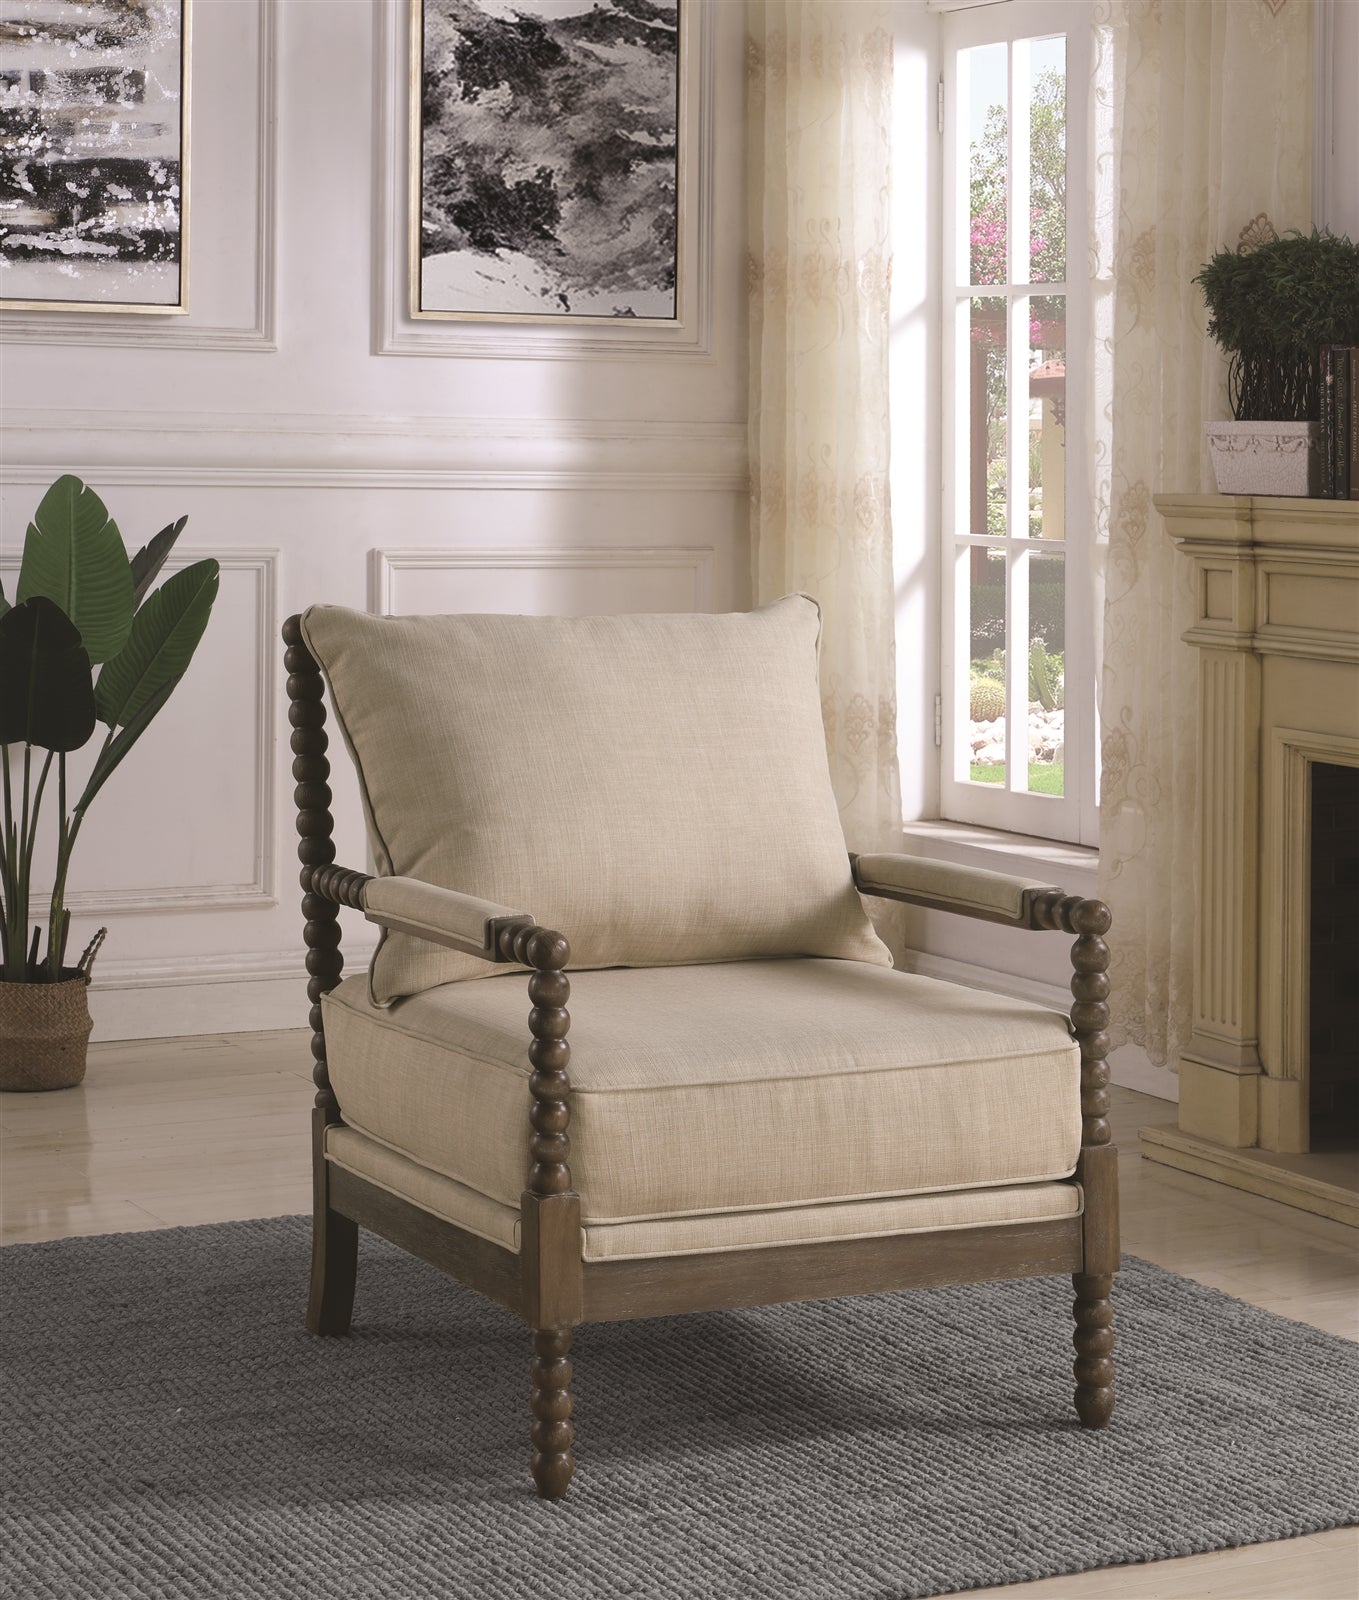 Megan's Oatmeal Linen Spindle Chair